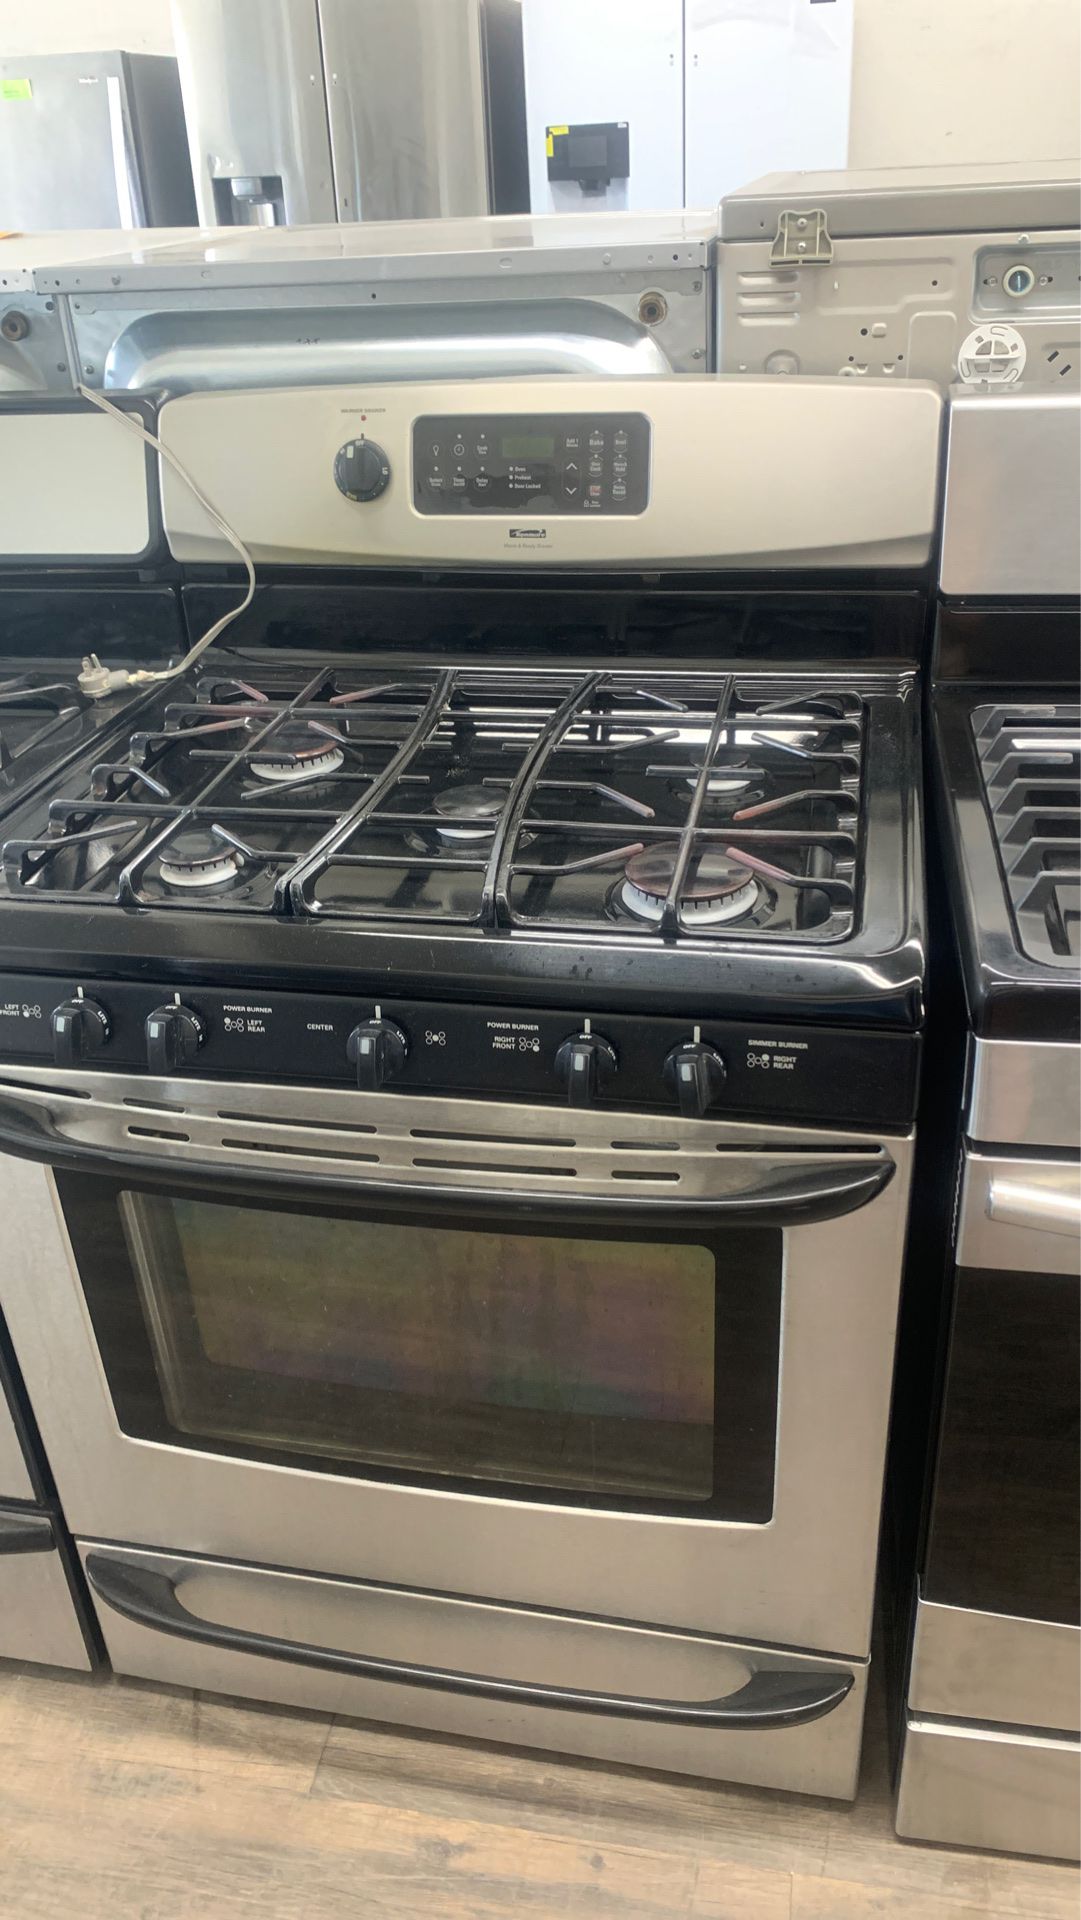 🍊🍊🍊 KENMORE STAINLESS STEEL GAS STOVE🍊🍊🍊